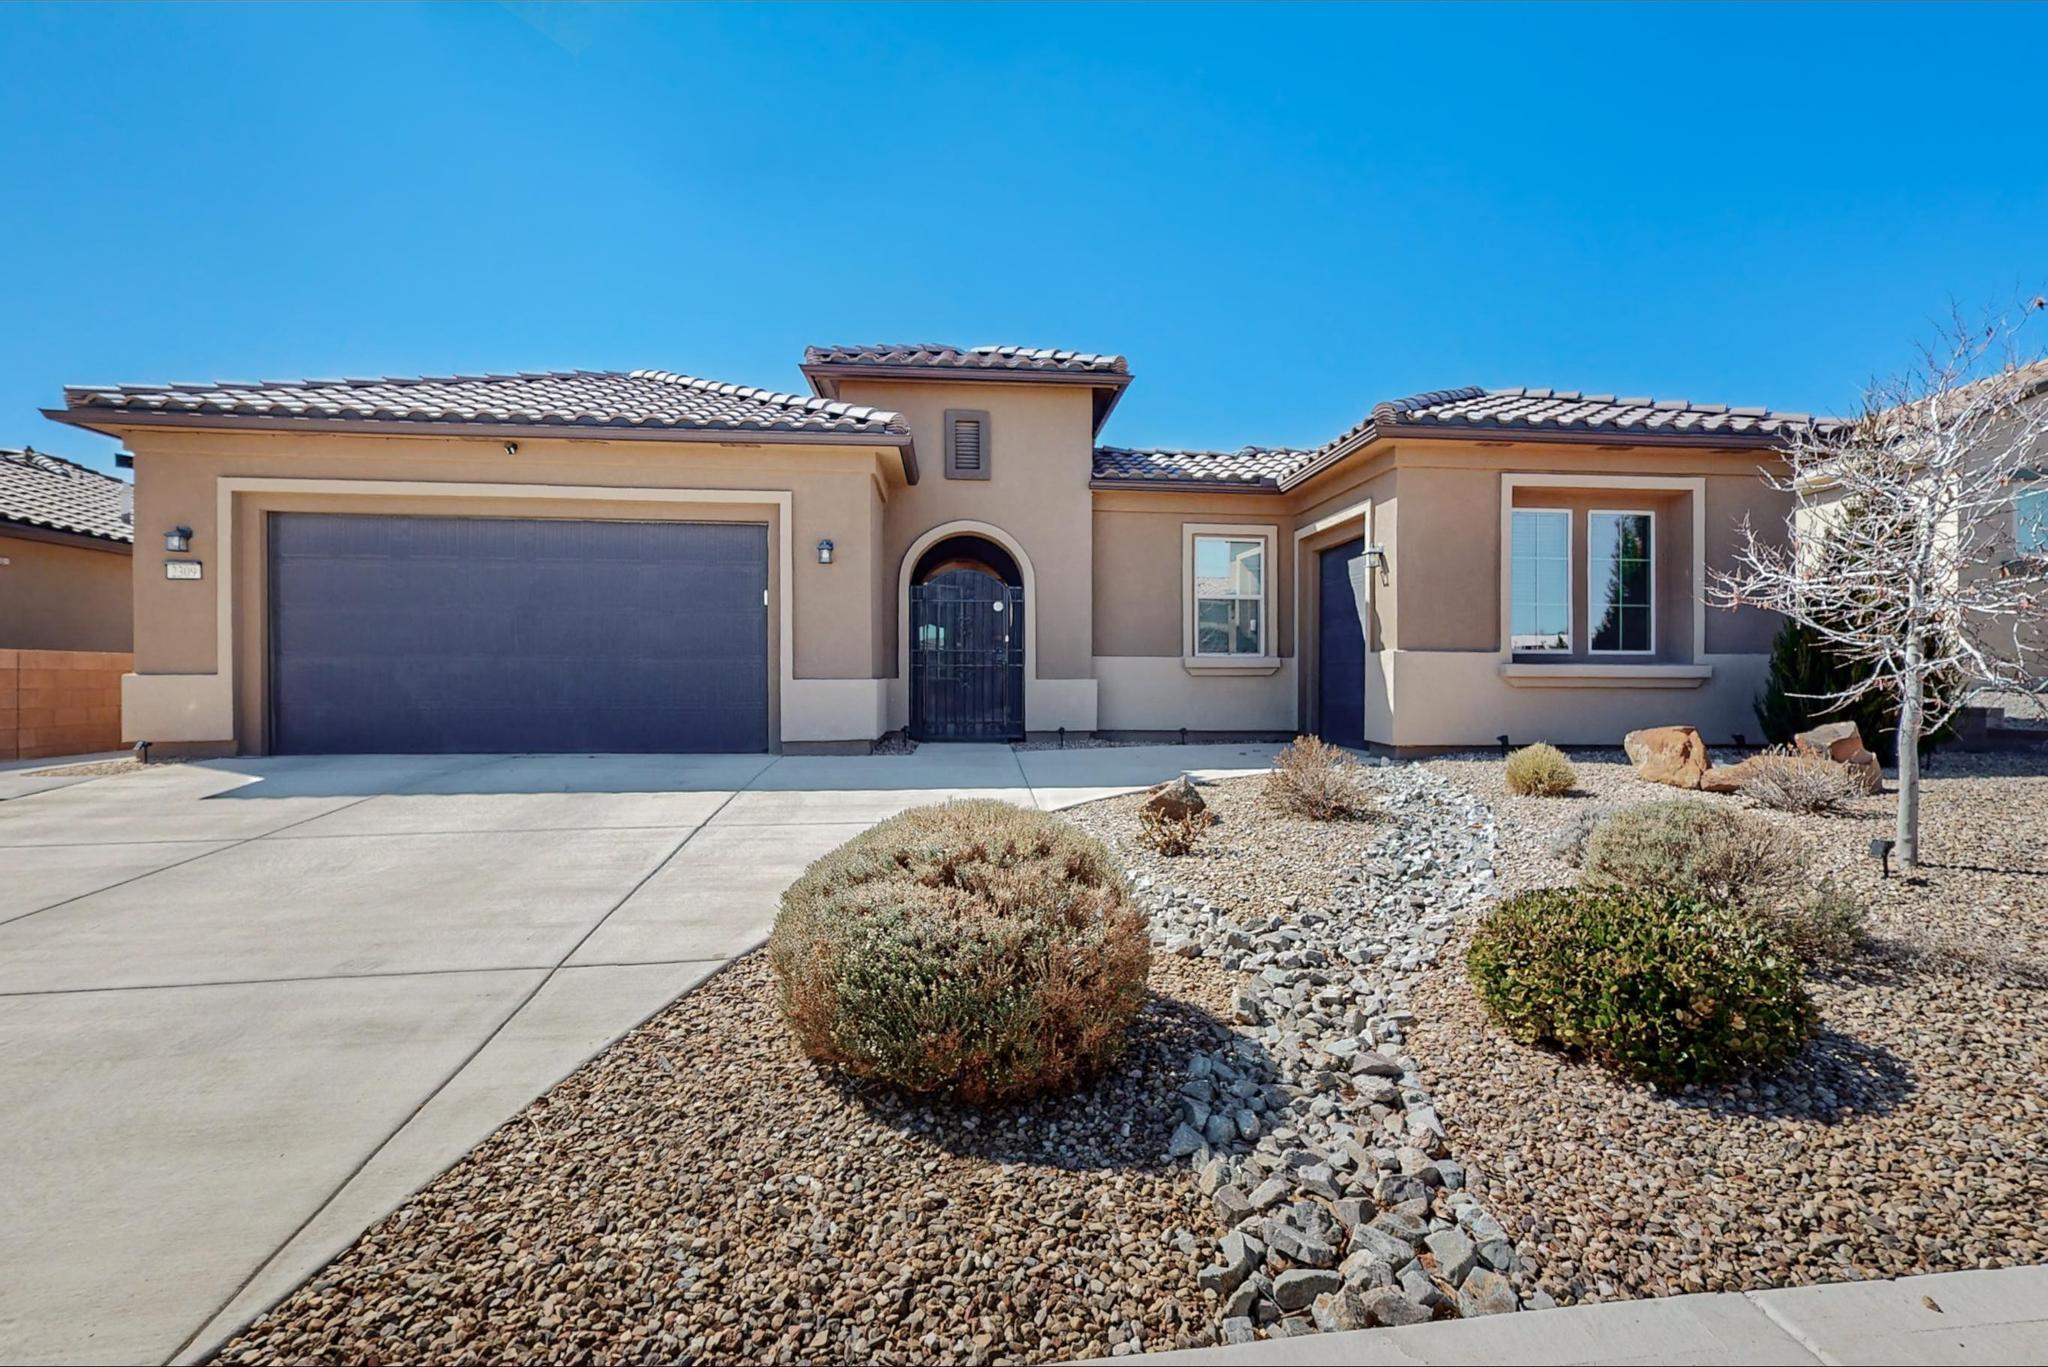 2309 Bates Well Lane NW, Albuquerque, New Mexico 87120, 2 Bedrooms Bedrooms, ,3 BathroomsBathrooms,Residential,For Sale,2309 Bates Well Lane NW,1058877